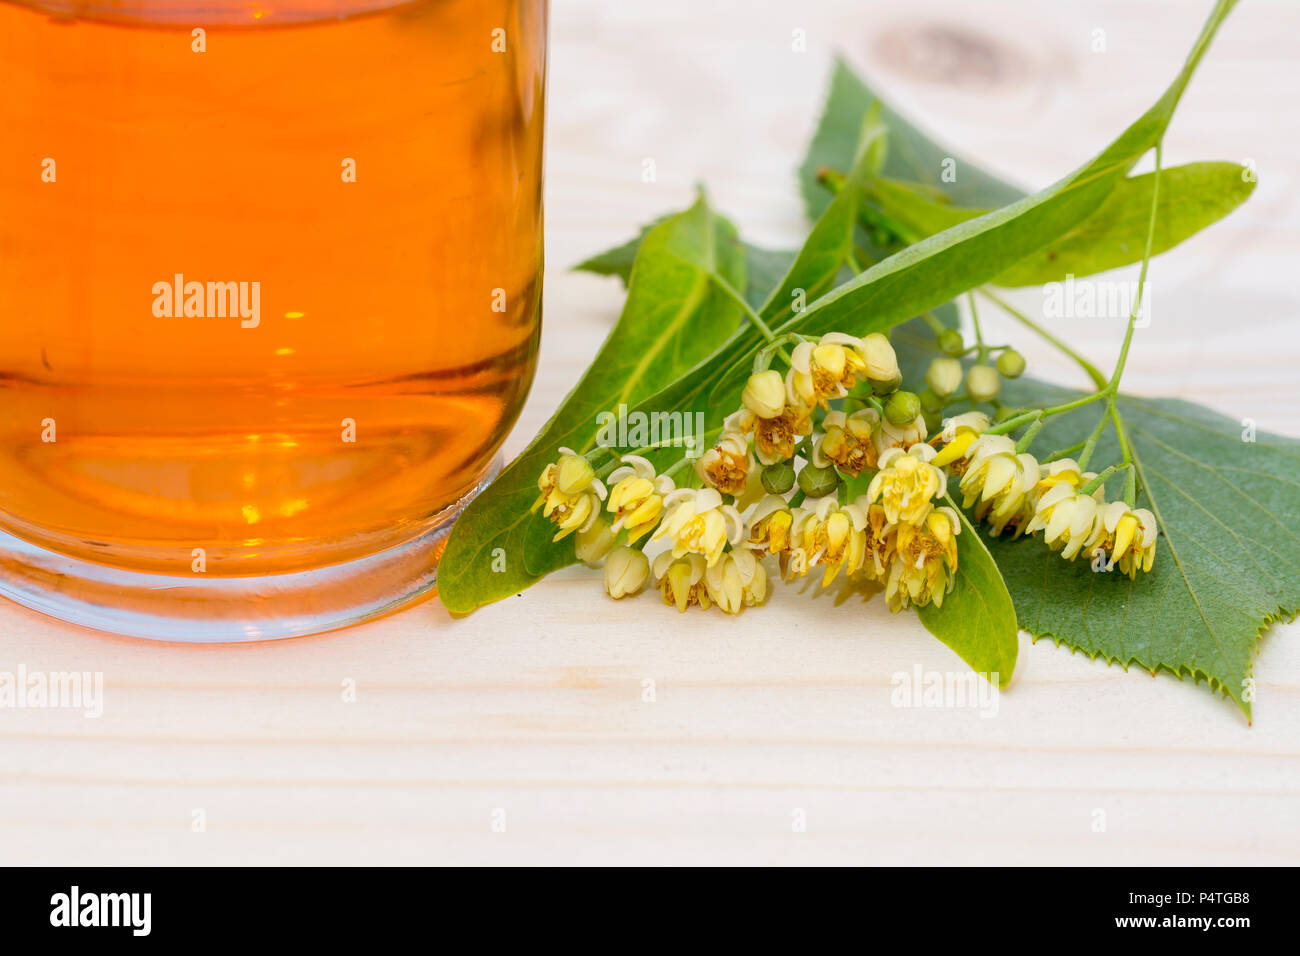 Linden tea in a glass cup blossoms and linden leaves Stock Photo